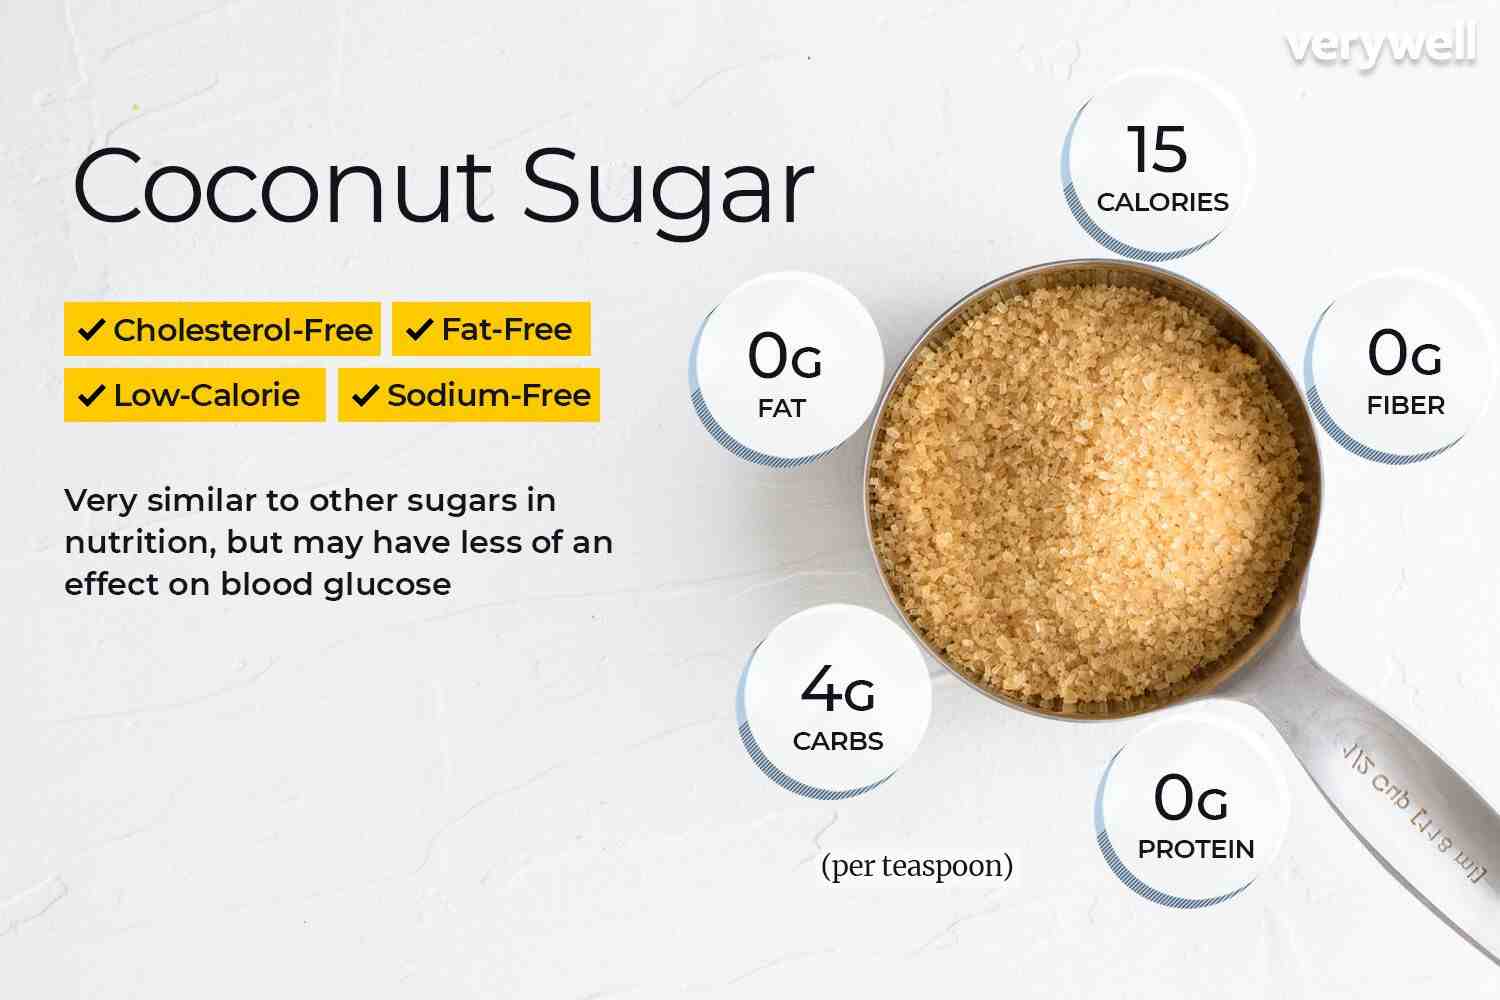 Is coconut high in sugar?